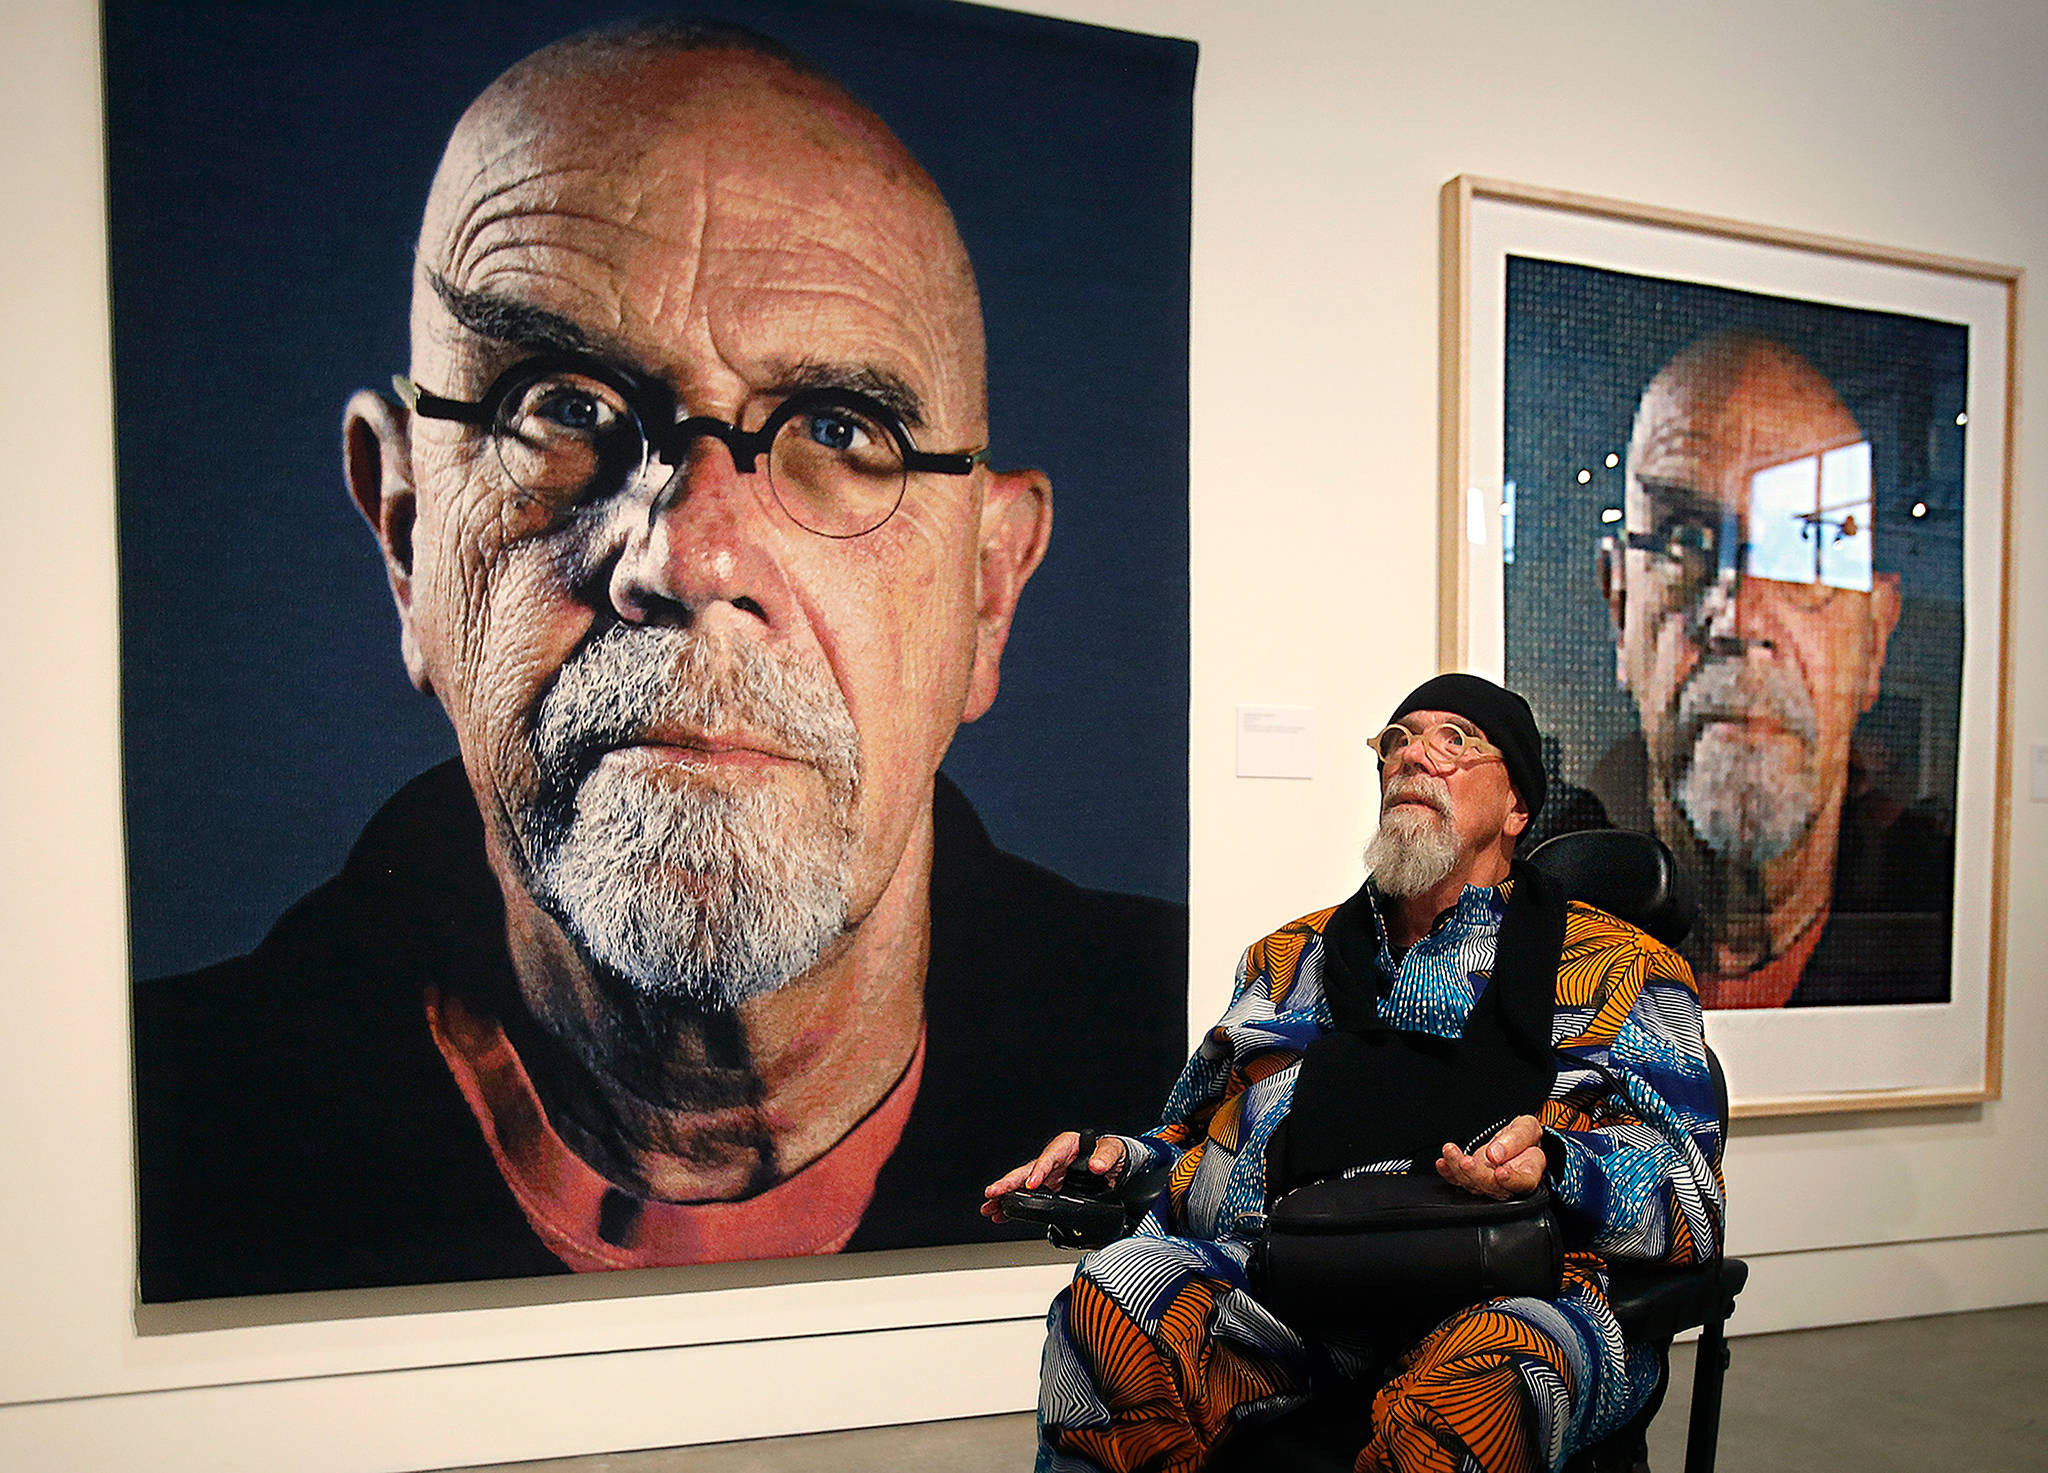 Photorealist Chuck Close, later in life for one of his self-portraits